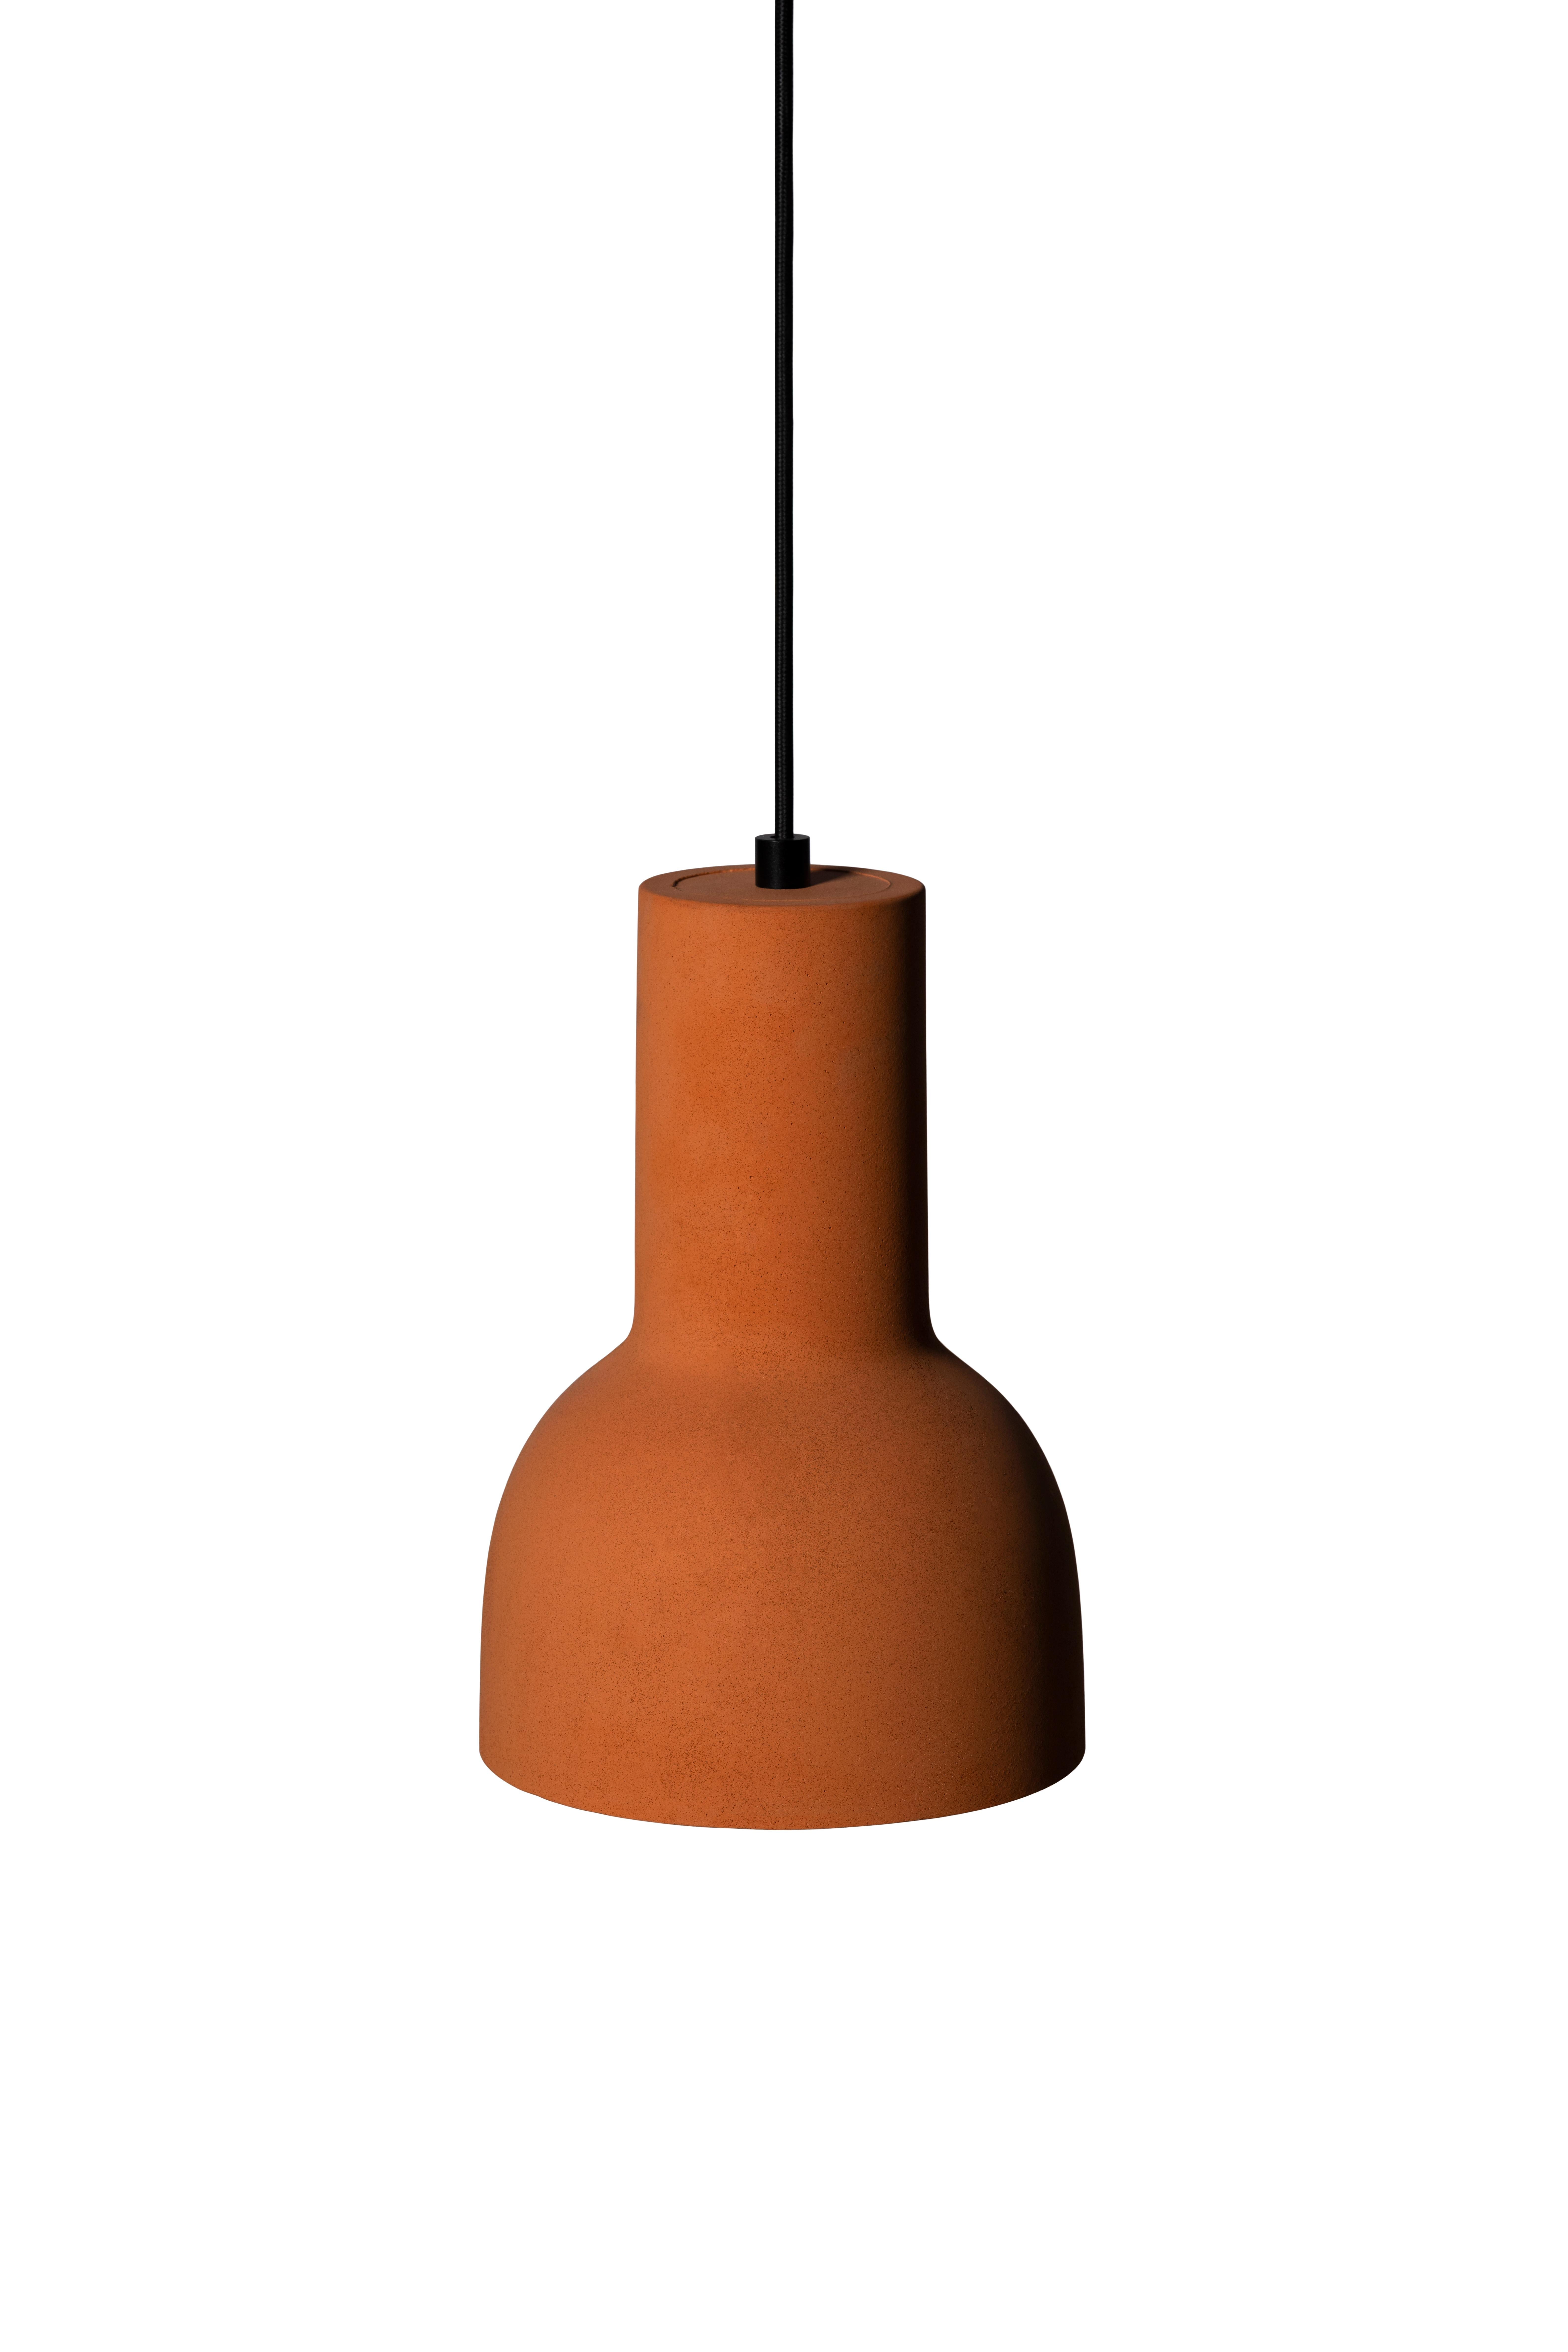 Chinese Contemporary Pendant Lamp 'Echo' in Terracotta, Orange For Sale